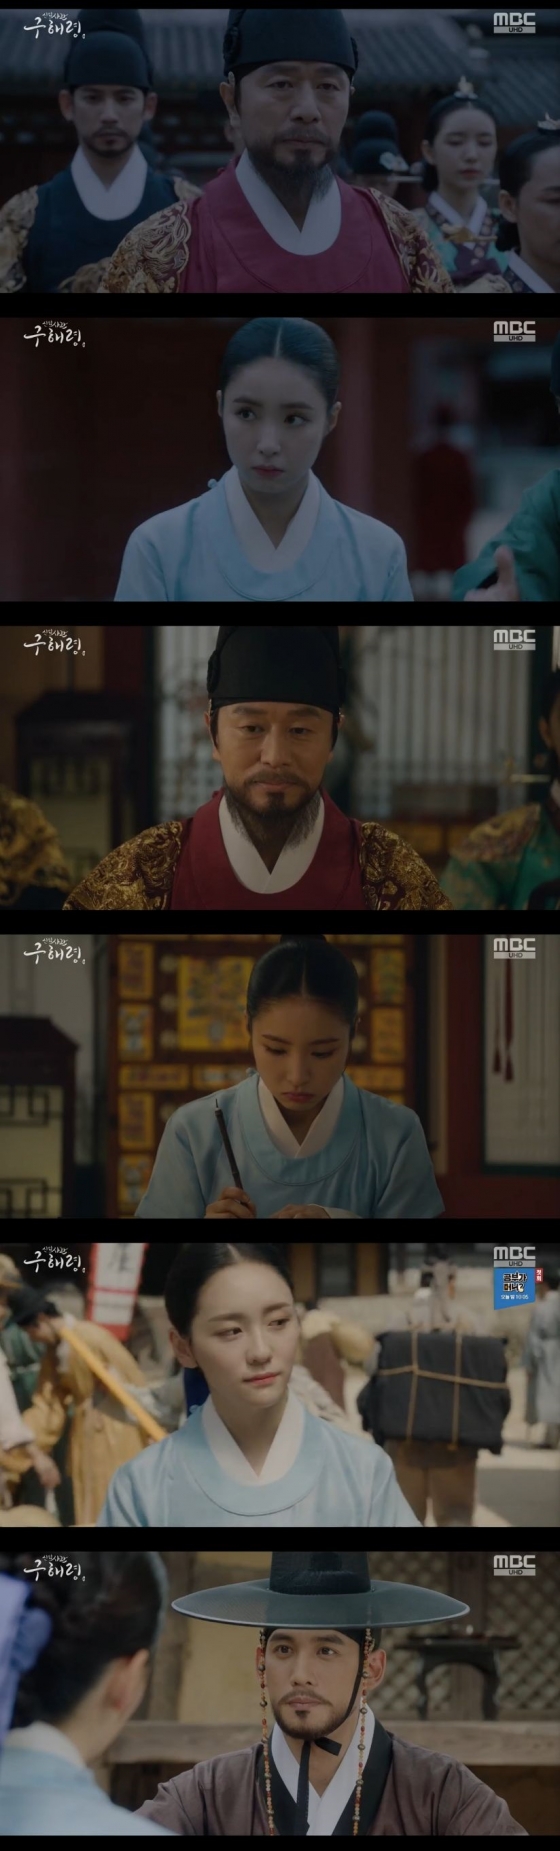 Shin Se-kyung of Drama New Museum Rookie Historian Goo Hae-ryung suffered from the hardships at the back of Kim Min-Sang.MBC Tree Drama New Museum Rookie Historian Goo Hae-ryung (playplayed by Kim Ho-soo, directed by Kang Il-soo and Han Hyun-hee) broadcasted on the afternoon of the 22nd, featured the image of King Lee Tae (Kim Min-Sang), who is suffering from heartache and harassing his servants.On this day, Lee Tae started from early morning with Lee Jin (Park Ki-woong), Daewon Daegun Irim (Cha Eun-woo), and called various subjects and Ada Lovelace Rookie Historian Goo Hae-ryungShin Se-kyung) to find a match.In contrast, Lim (Kim Yeo-jin) said, What kind of wind was blowing? What kind of wind was blowing in the human being who had been sending an inner tube on the holiday.It is not bad to get the dew at dawn like this, he said, and called it around dawn after leaving Lee and others outside.Lee also ordered Rookie Historian Goo Hae-ryung, the main cause of this incident, to enter the civil war.Rookie Historian Goo Hae-ryung had a hard time with Itae all day long.Rookie Historian Goo Hae-ryung returned to the presbytery after work and said, Did this mean that you would give me a good morning and allow me to enter the civil war?Haru, youre with the King all day? Im alone? Do you know what Im doing?I can not even get snow from dawn and I have to clean up my charge shit. Other officers said it was an opportunity to be with the King at Rookie Historian Goo Hae-ryung, and Rookie Historian Goo Hae-ryung said, Where is that opportunity?This is a war that takes the pride of our precepts and the future of your Ada Lovelace, Yang said.I will not stand back even if I will bubble up and fall down. I will write it until the day when the king eats white flag.Itae handed a glass to Rookie Historian Goo Hae-ryung and said, Are you not sick of it? It is a drink with the king.You should look at me as a servant, not a soldier once.Rookie Historian Goo Hae-ryung tried to refuse, but Lee said, Why, did the advanced people teach the sergeant not the servant? Listen.Drink this and you, I will put down my duty. Rookie Historian Goo Hae-ryung responded firmly, Your Grace, I have a lot of alcohol, and it is no use if you intend to get me drunk.What do you say to open your mouth? Even if you lock it in the jade, you hold it for two nights and three days, you pick it up, you feed it, you feed it.Why do you want to overcome the wage? Rookie Historian Goo Hae-ryung said, This is not a matter of losing Yi Gi, but because of Yi Gi, the problem of keeping or forsaken the officers duties.I dont know how to say it every time I say it. Yeah, dont say it. Instead, erase it without anyone knowing it.Meanwhile, Song Sa-hee (Park Ji-hyun) stepped out following the undercover action of Lee Jin (Park Ki-woong); Song Sa-hee said, I saw it for the first time; the way Desperation laughed.Was it so good to be out of the palace? Lee Jin said playfully, Do you want to record it? So Song Sa-hee put down the brush and said, I dont intend to write a single letter, what happens today.Lee Jin said: Look around, no one looks at me here, Im just a passerby, a little expensive in clothes.I grew up in Saga, not in the palace. My dream was to become a general and to go to the battlefield.